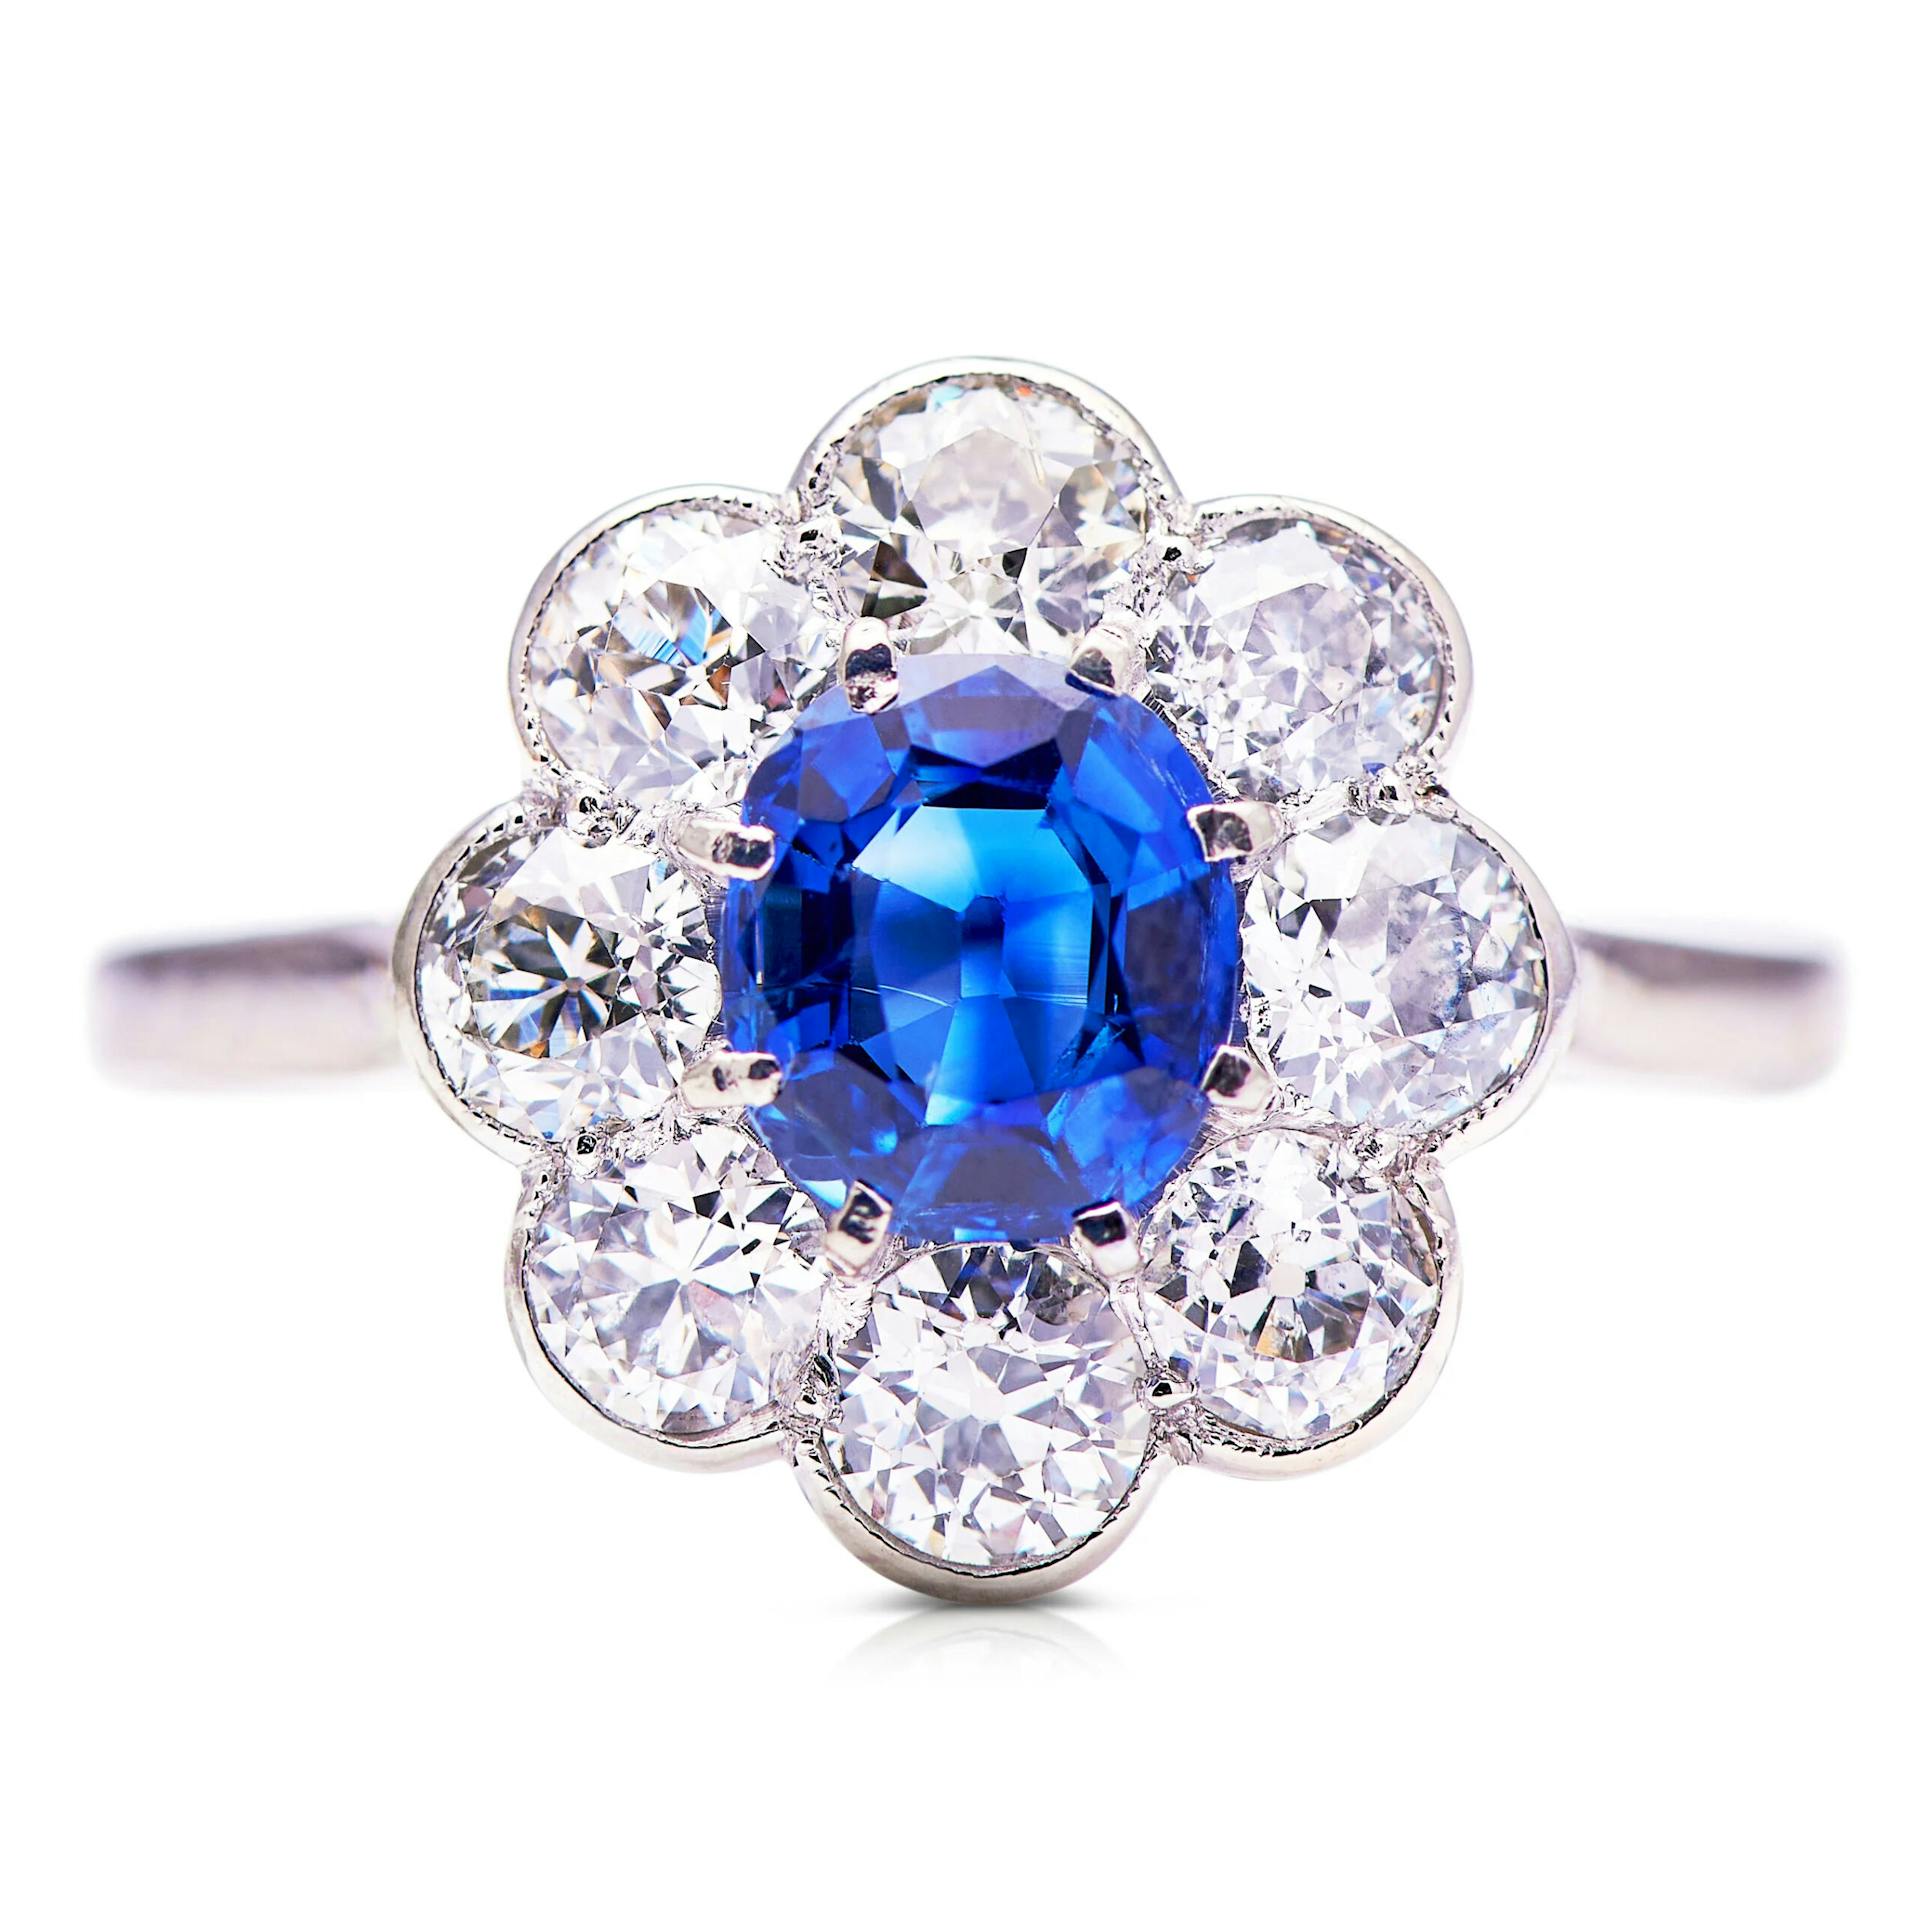 The Antique Ring Boutique - UK and worldwide via our website